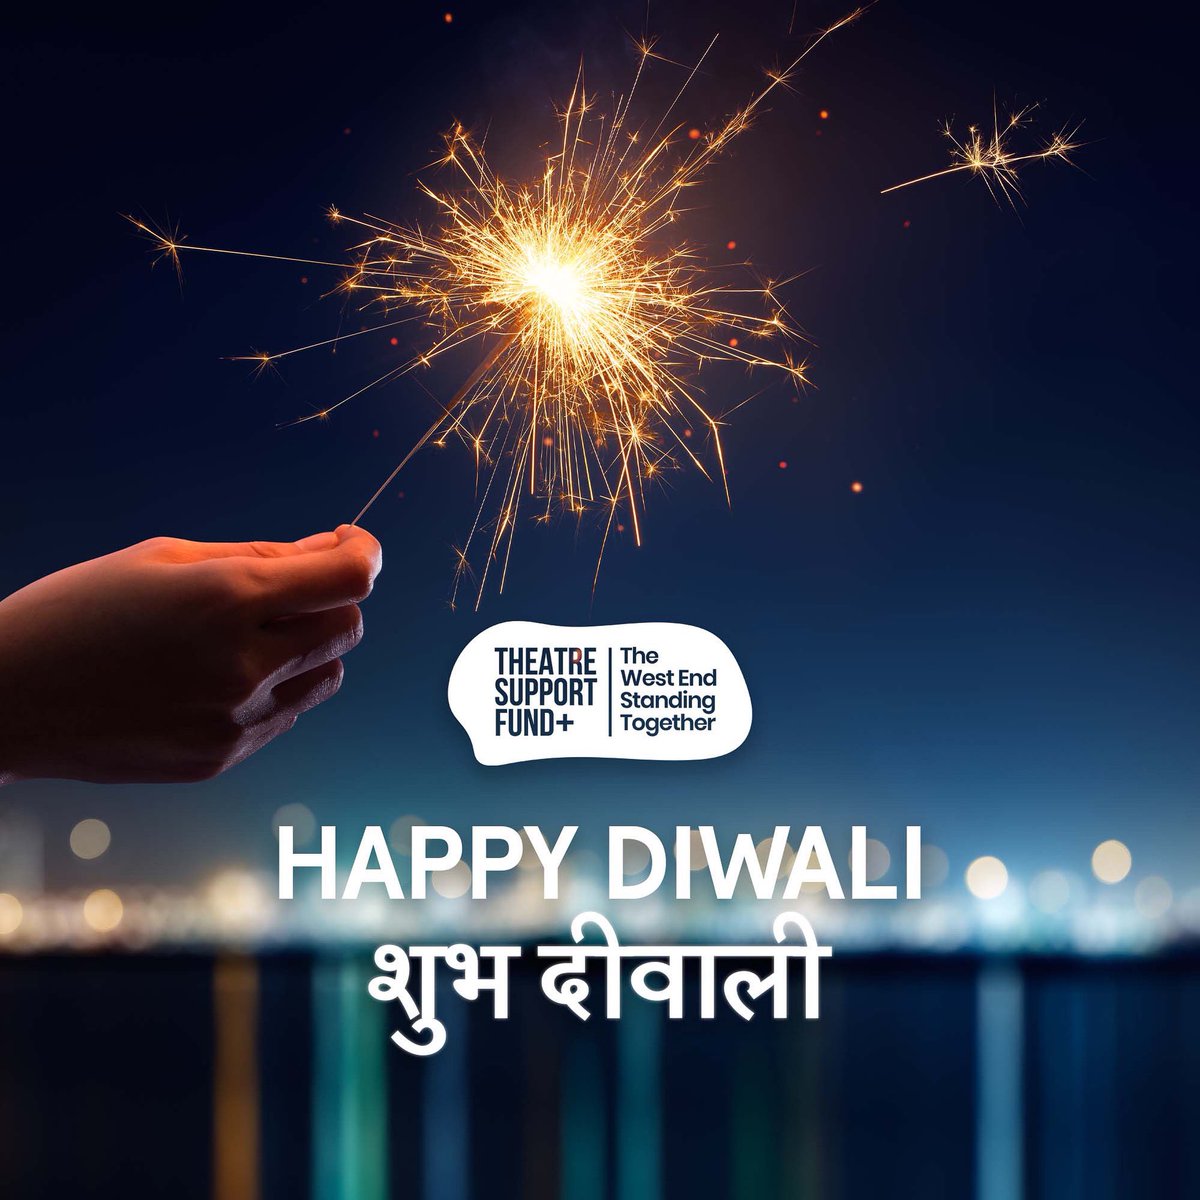 Happy Diwali from all of us @theatre_support! To the companies and our supporters across the West End and all over the UK, that will be celebrating the Festival of Lights, we hope it’s filled with happiness, joy, and prosperity. 🪔🎆✨ #HappyDiwali #Diwali #FestivalOfLights